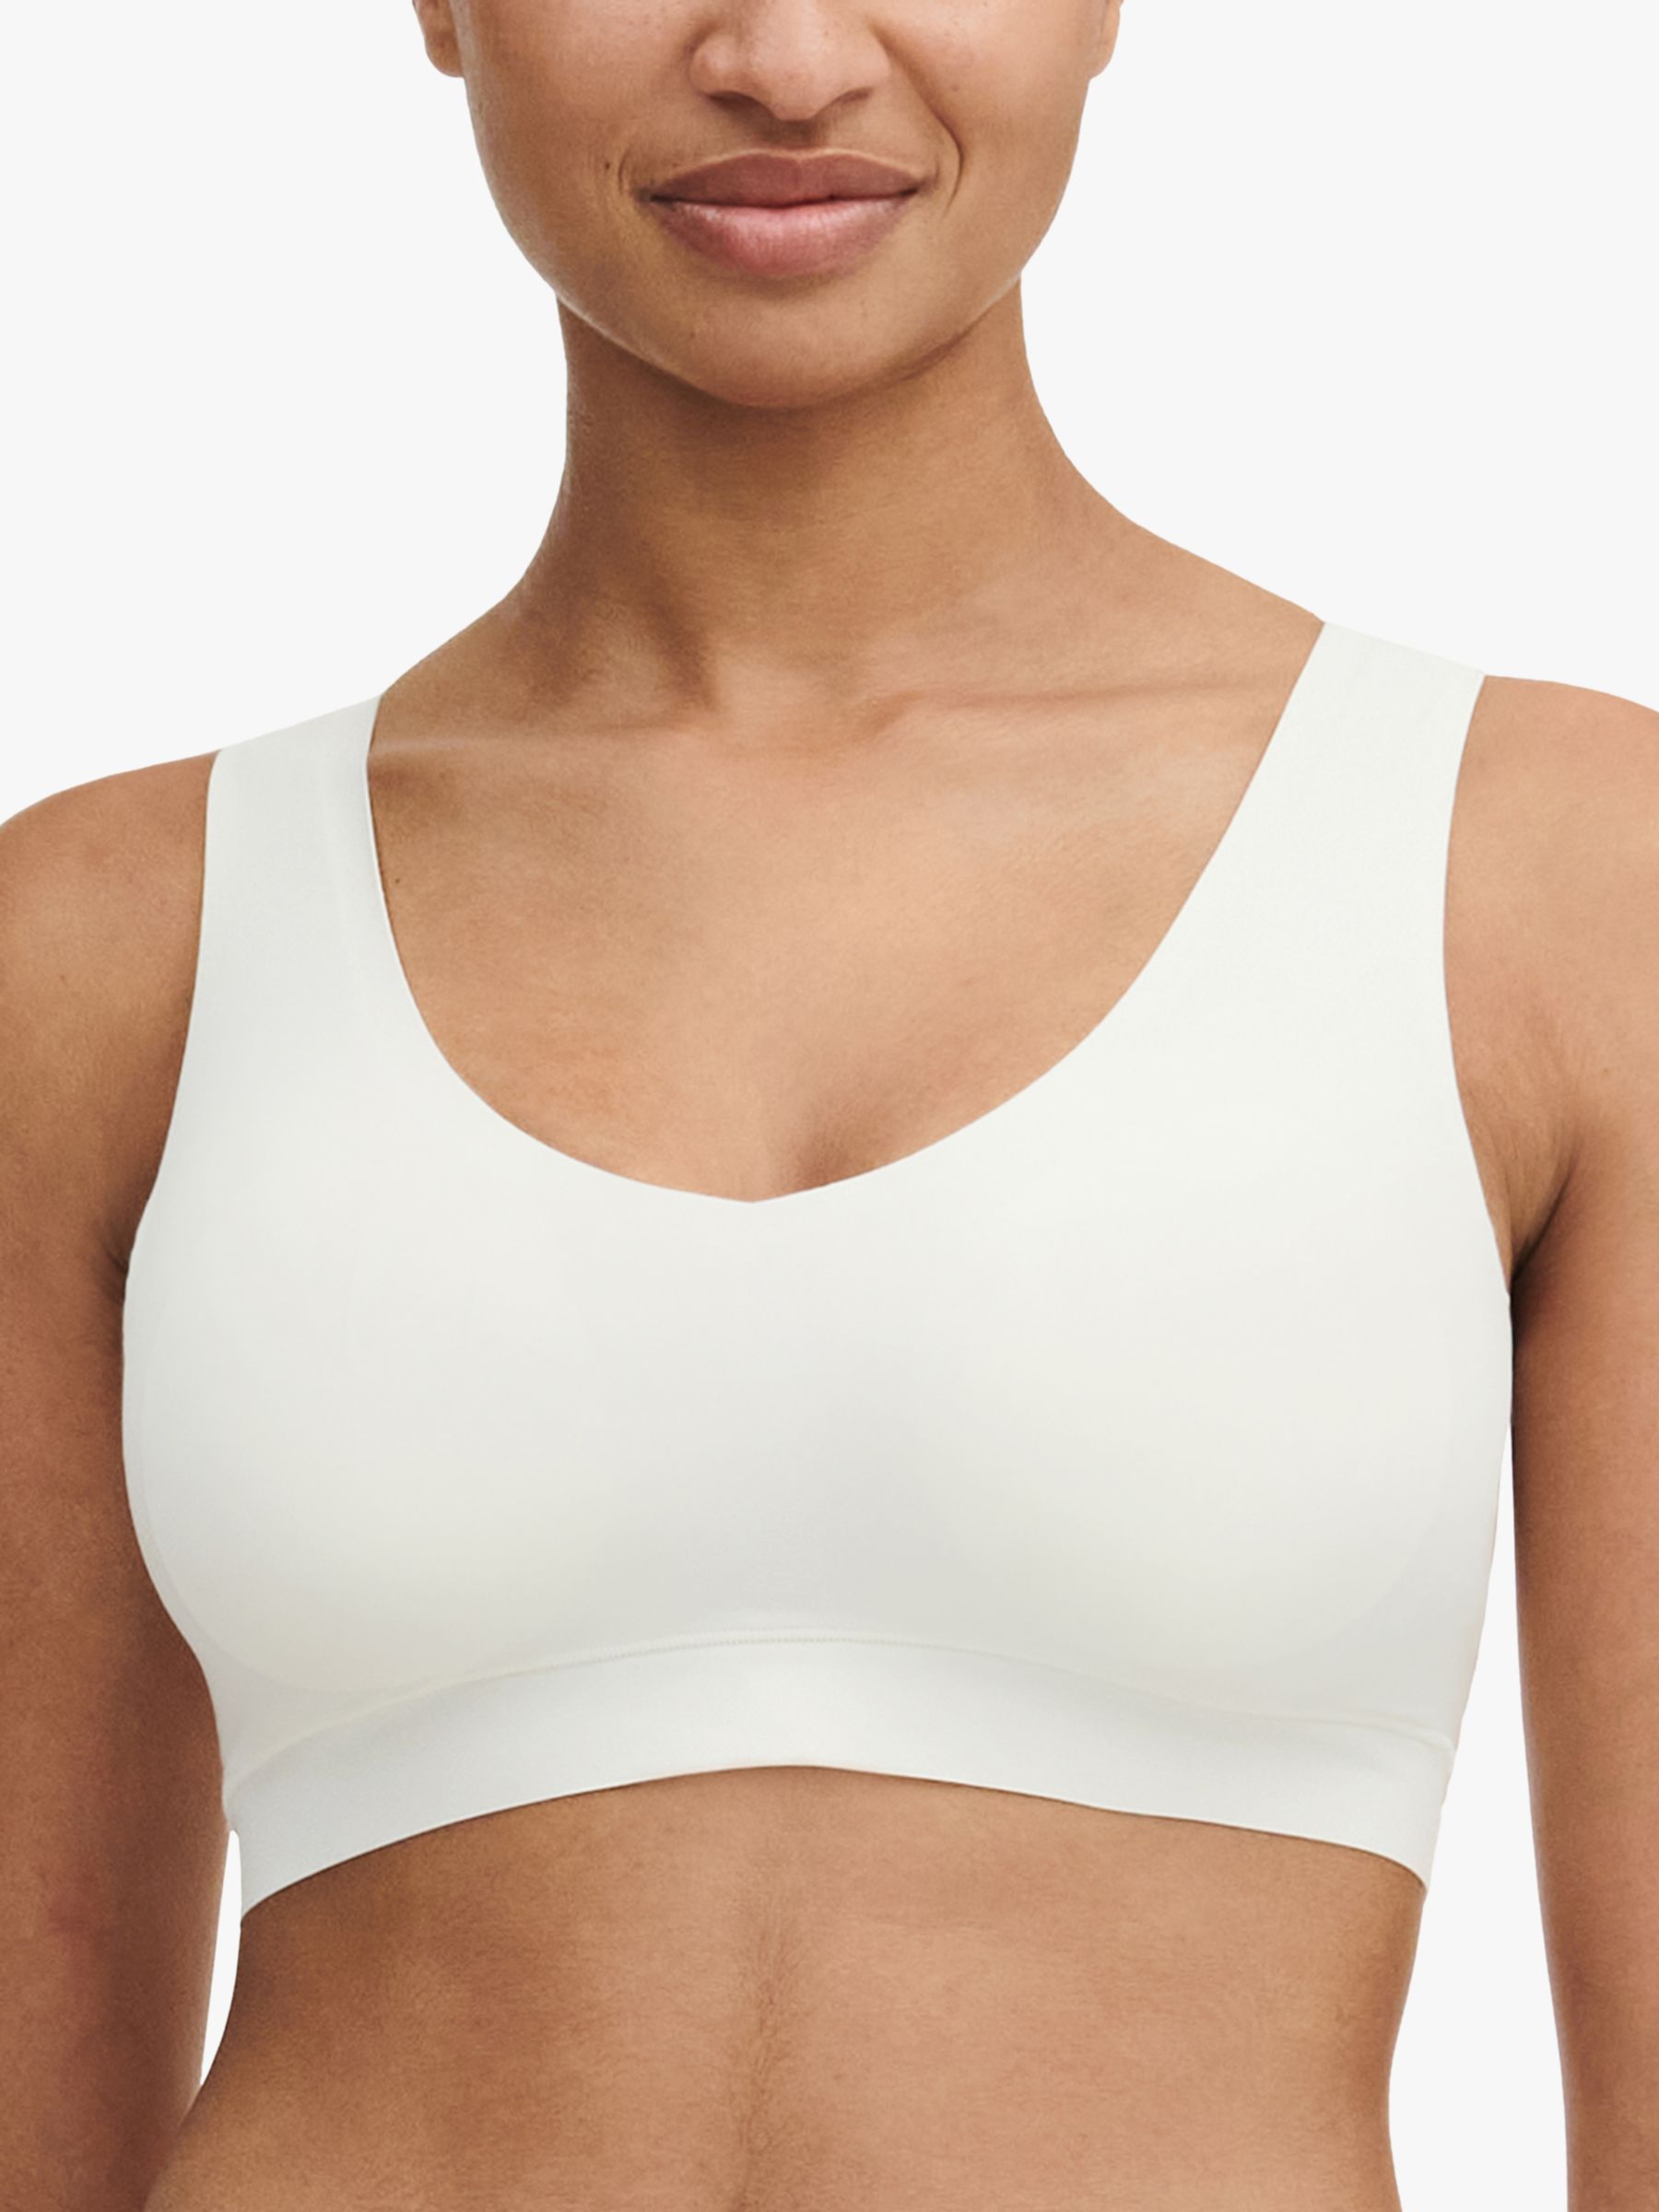 Chantelle, a convertible sports bra to keep your ladies in place